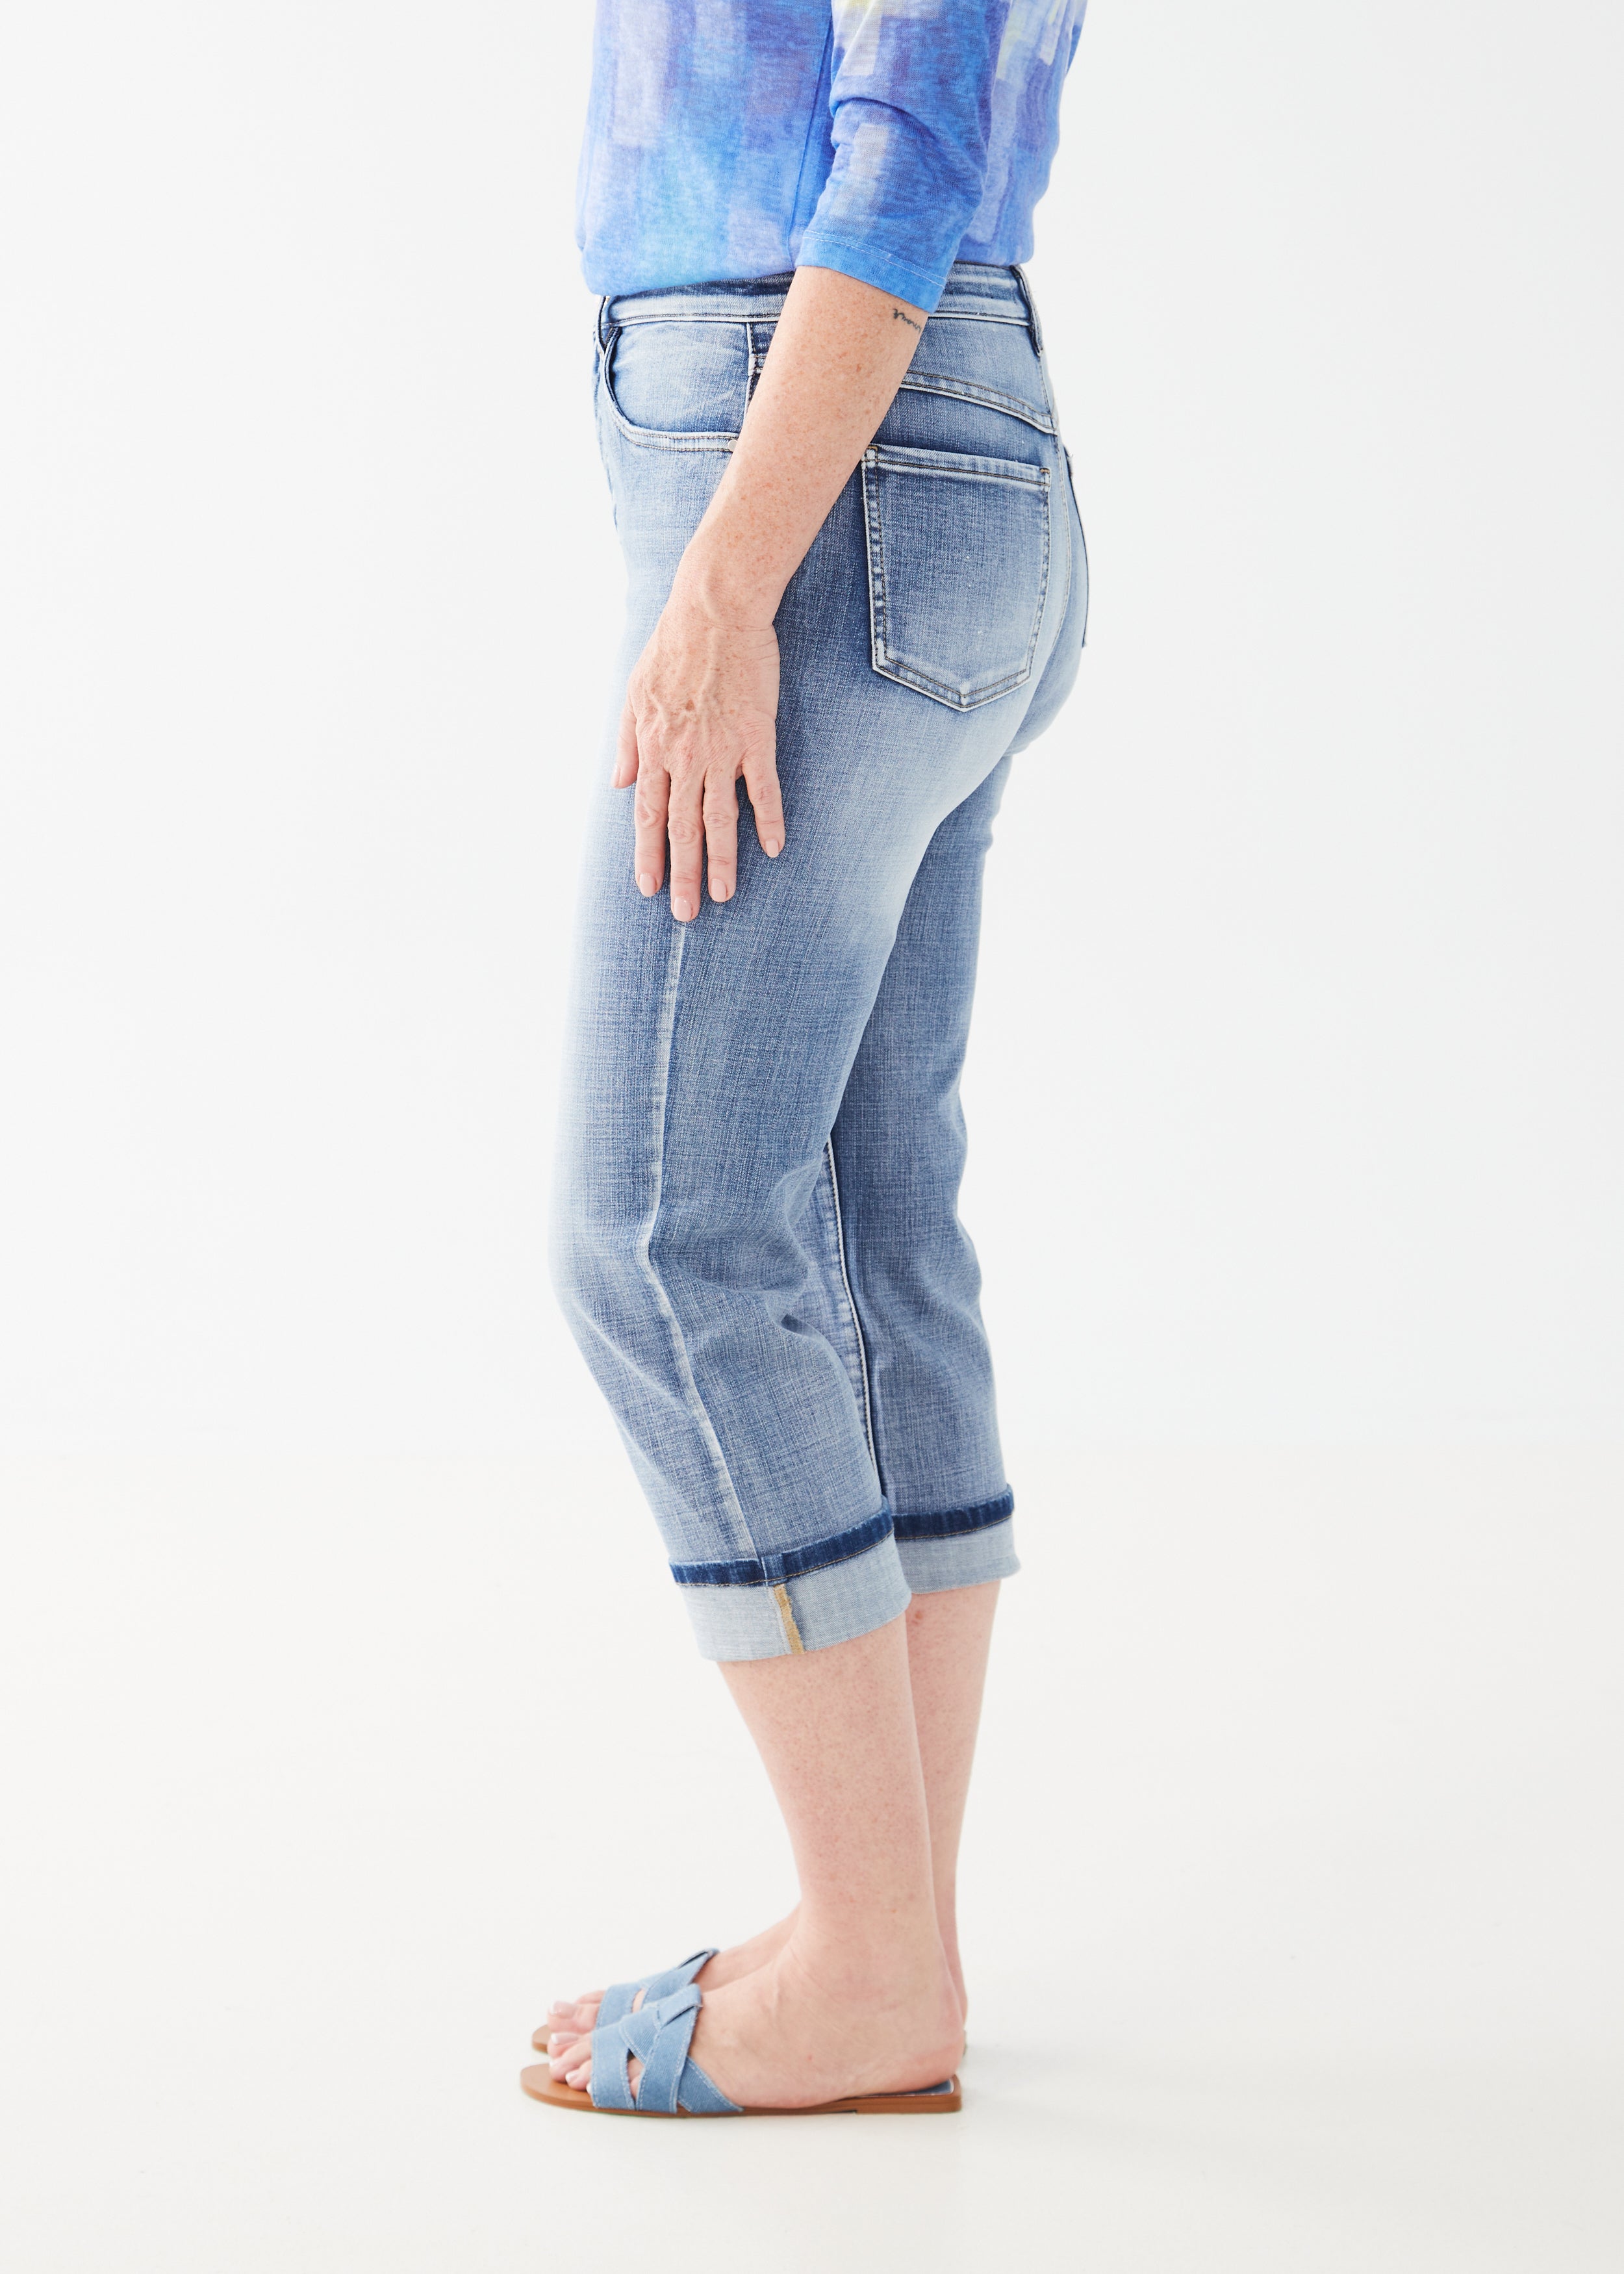 Introducing the FDJ Suzanne Capri, made from high-quality denim in a medium vintage wash.